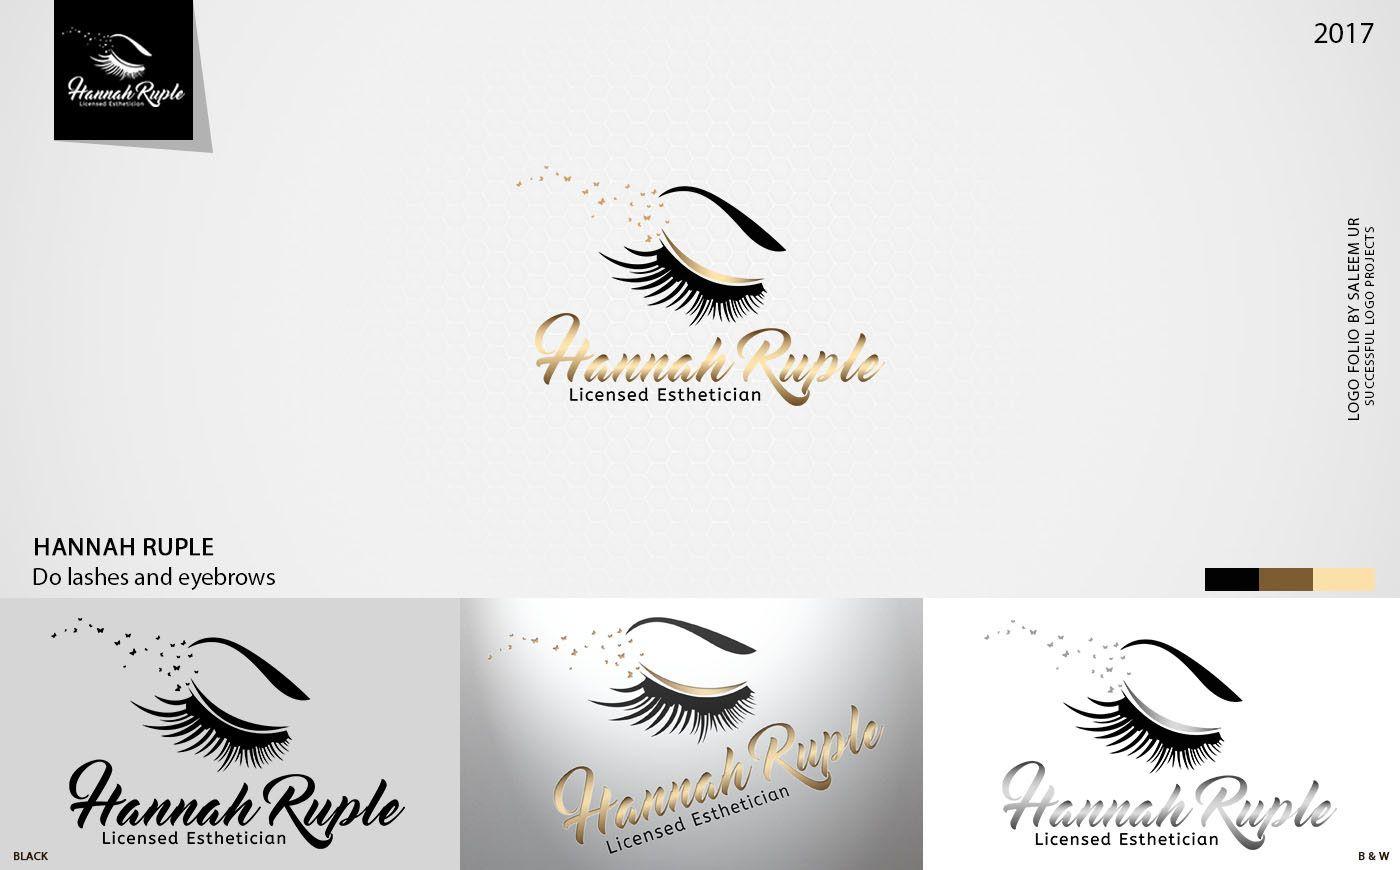 Esthetician Logo - Top's 10 Logo Design Projects For Client(Successful) on Behance